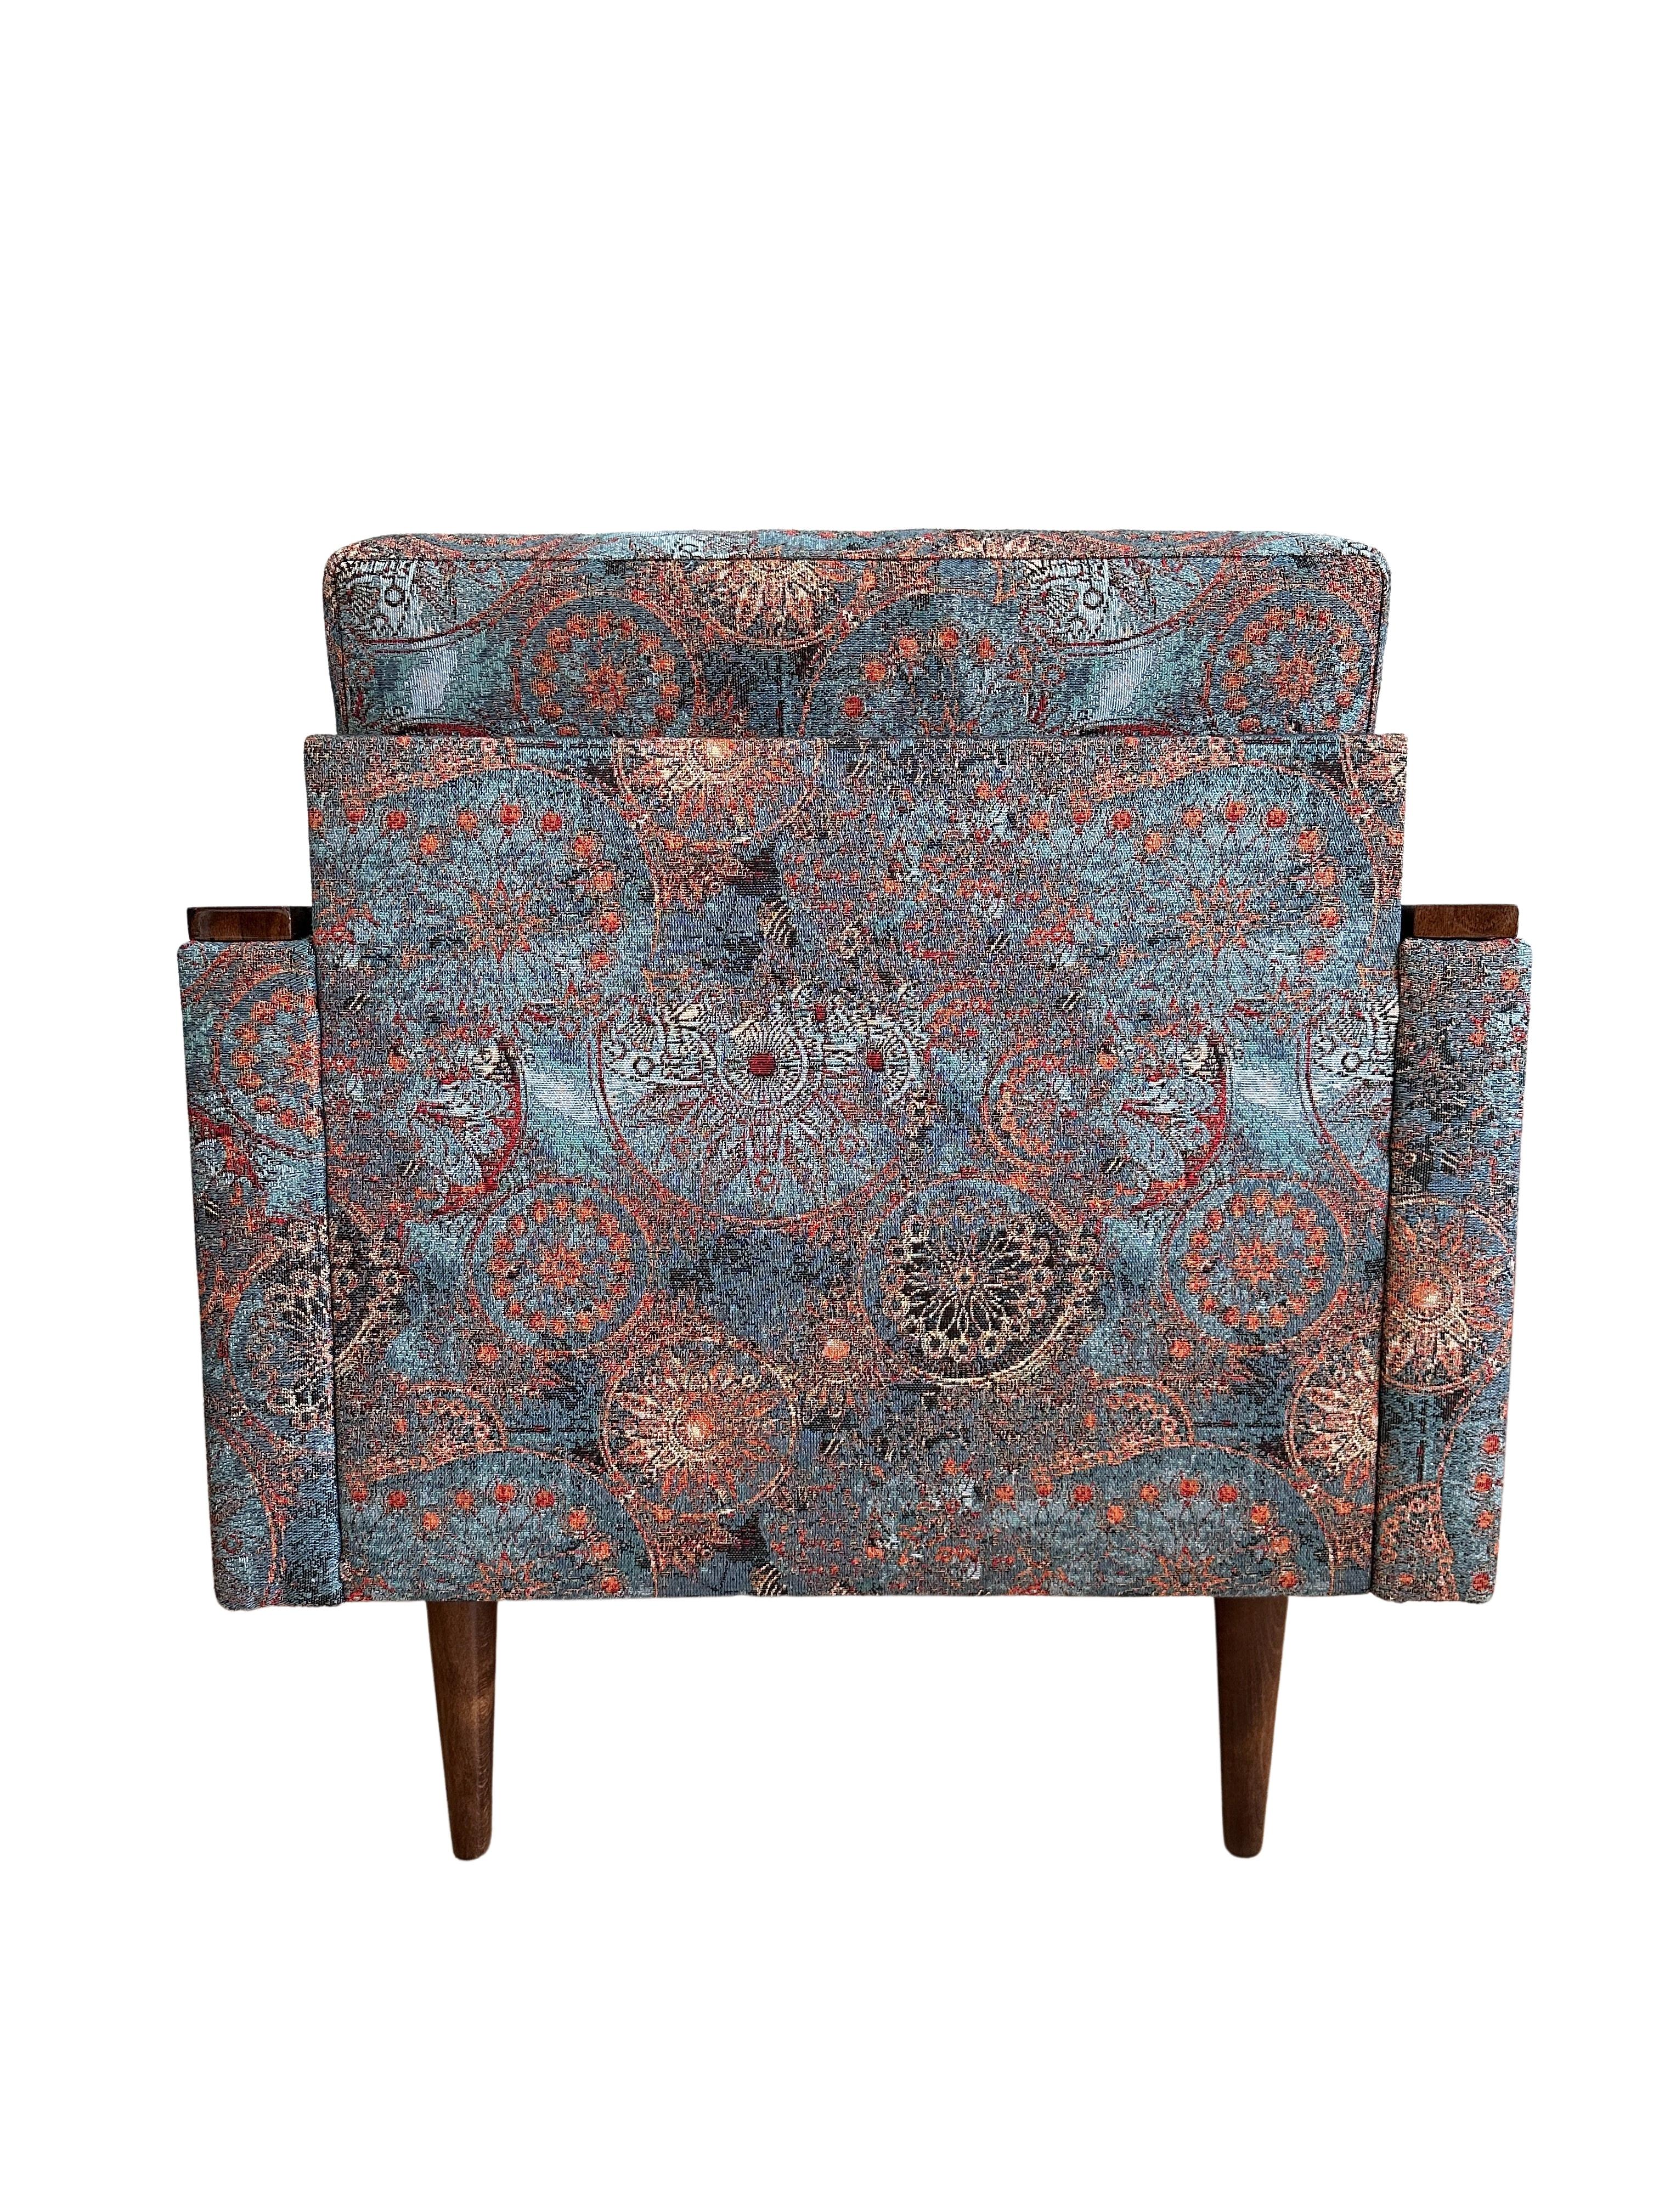 Midcentury Geometric Armchair with Ethnic Pattern, Europe, 1970s For Sale 2